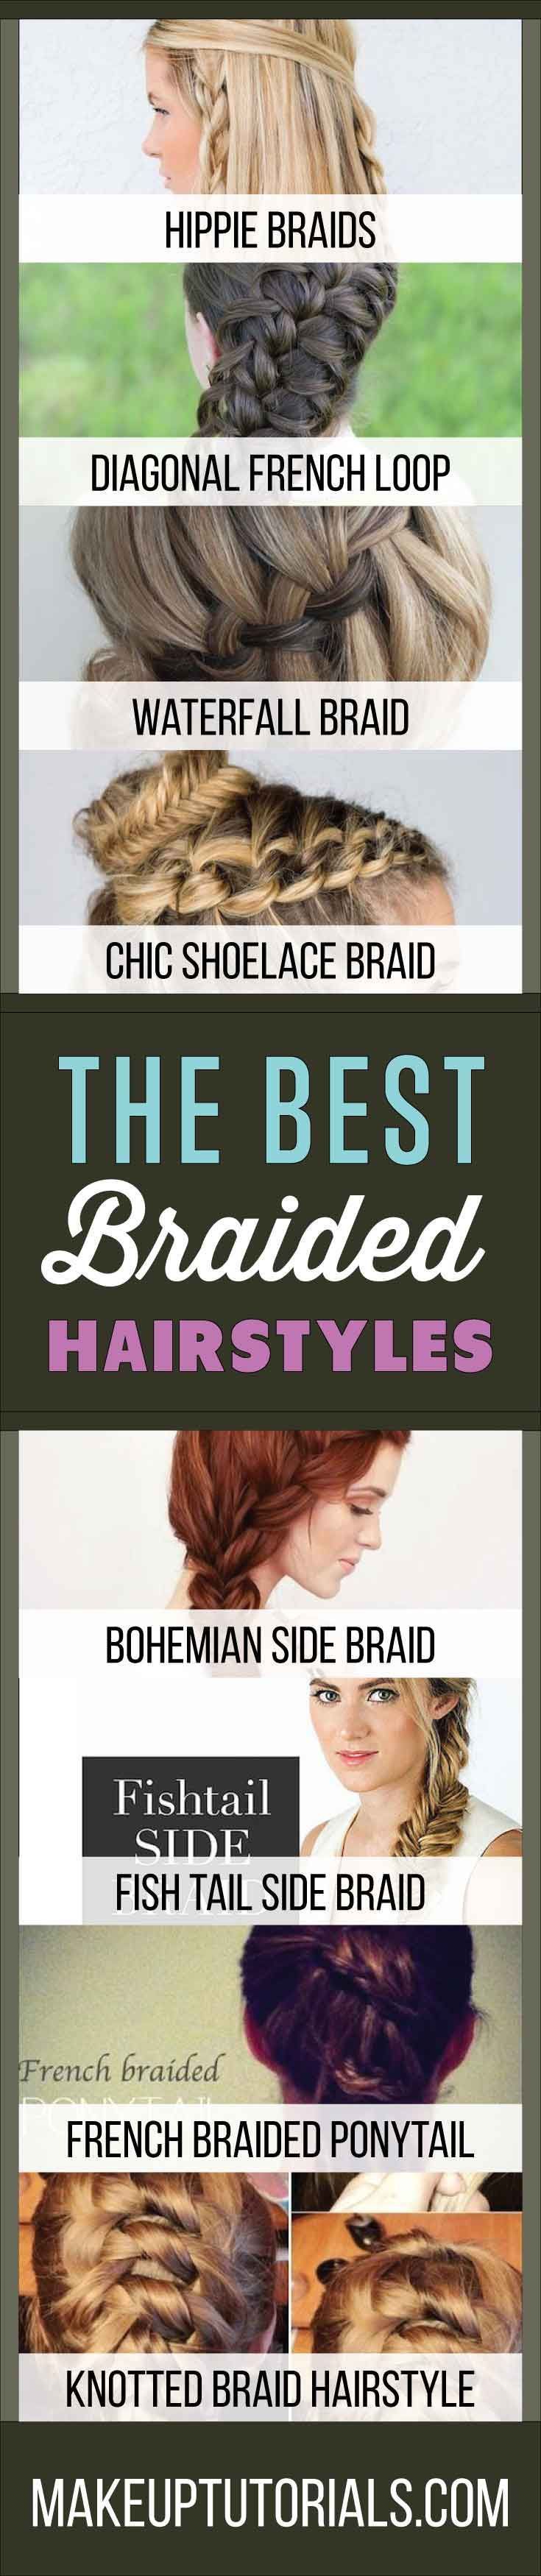 The Best Braided Hairstyles | How To Do Cool Hair Tips For Gals With Braids By M...